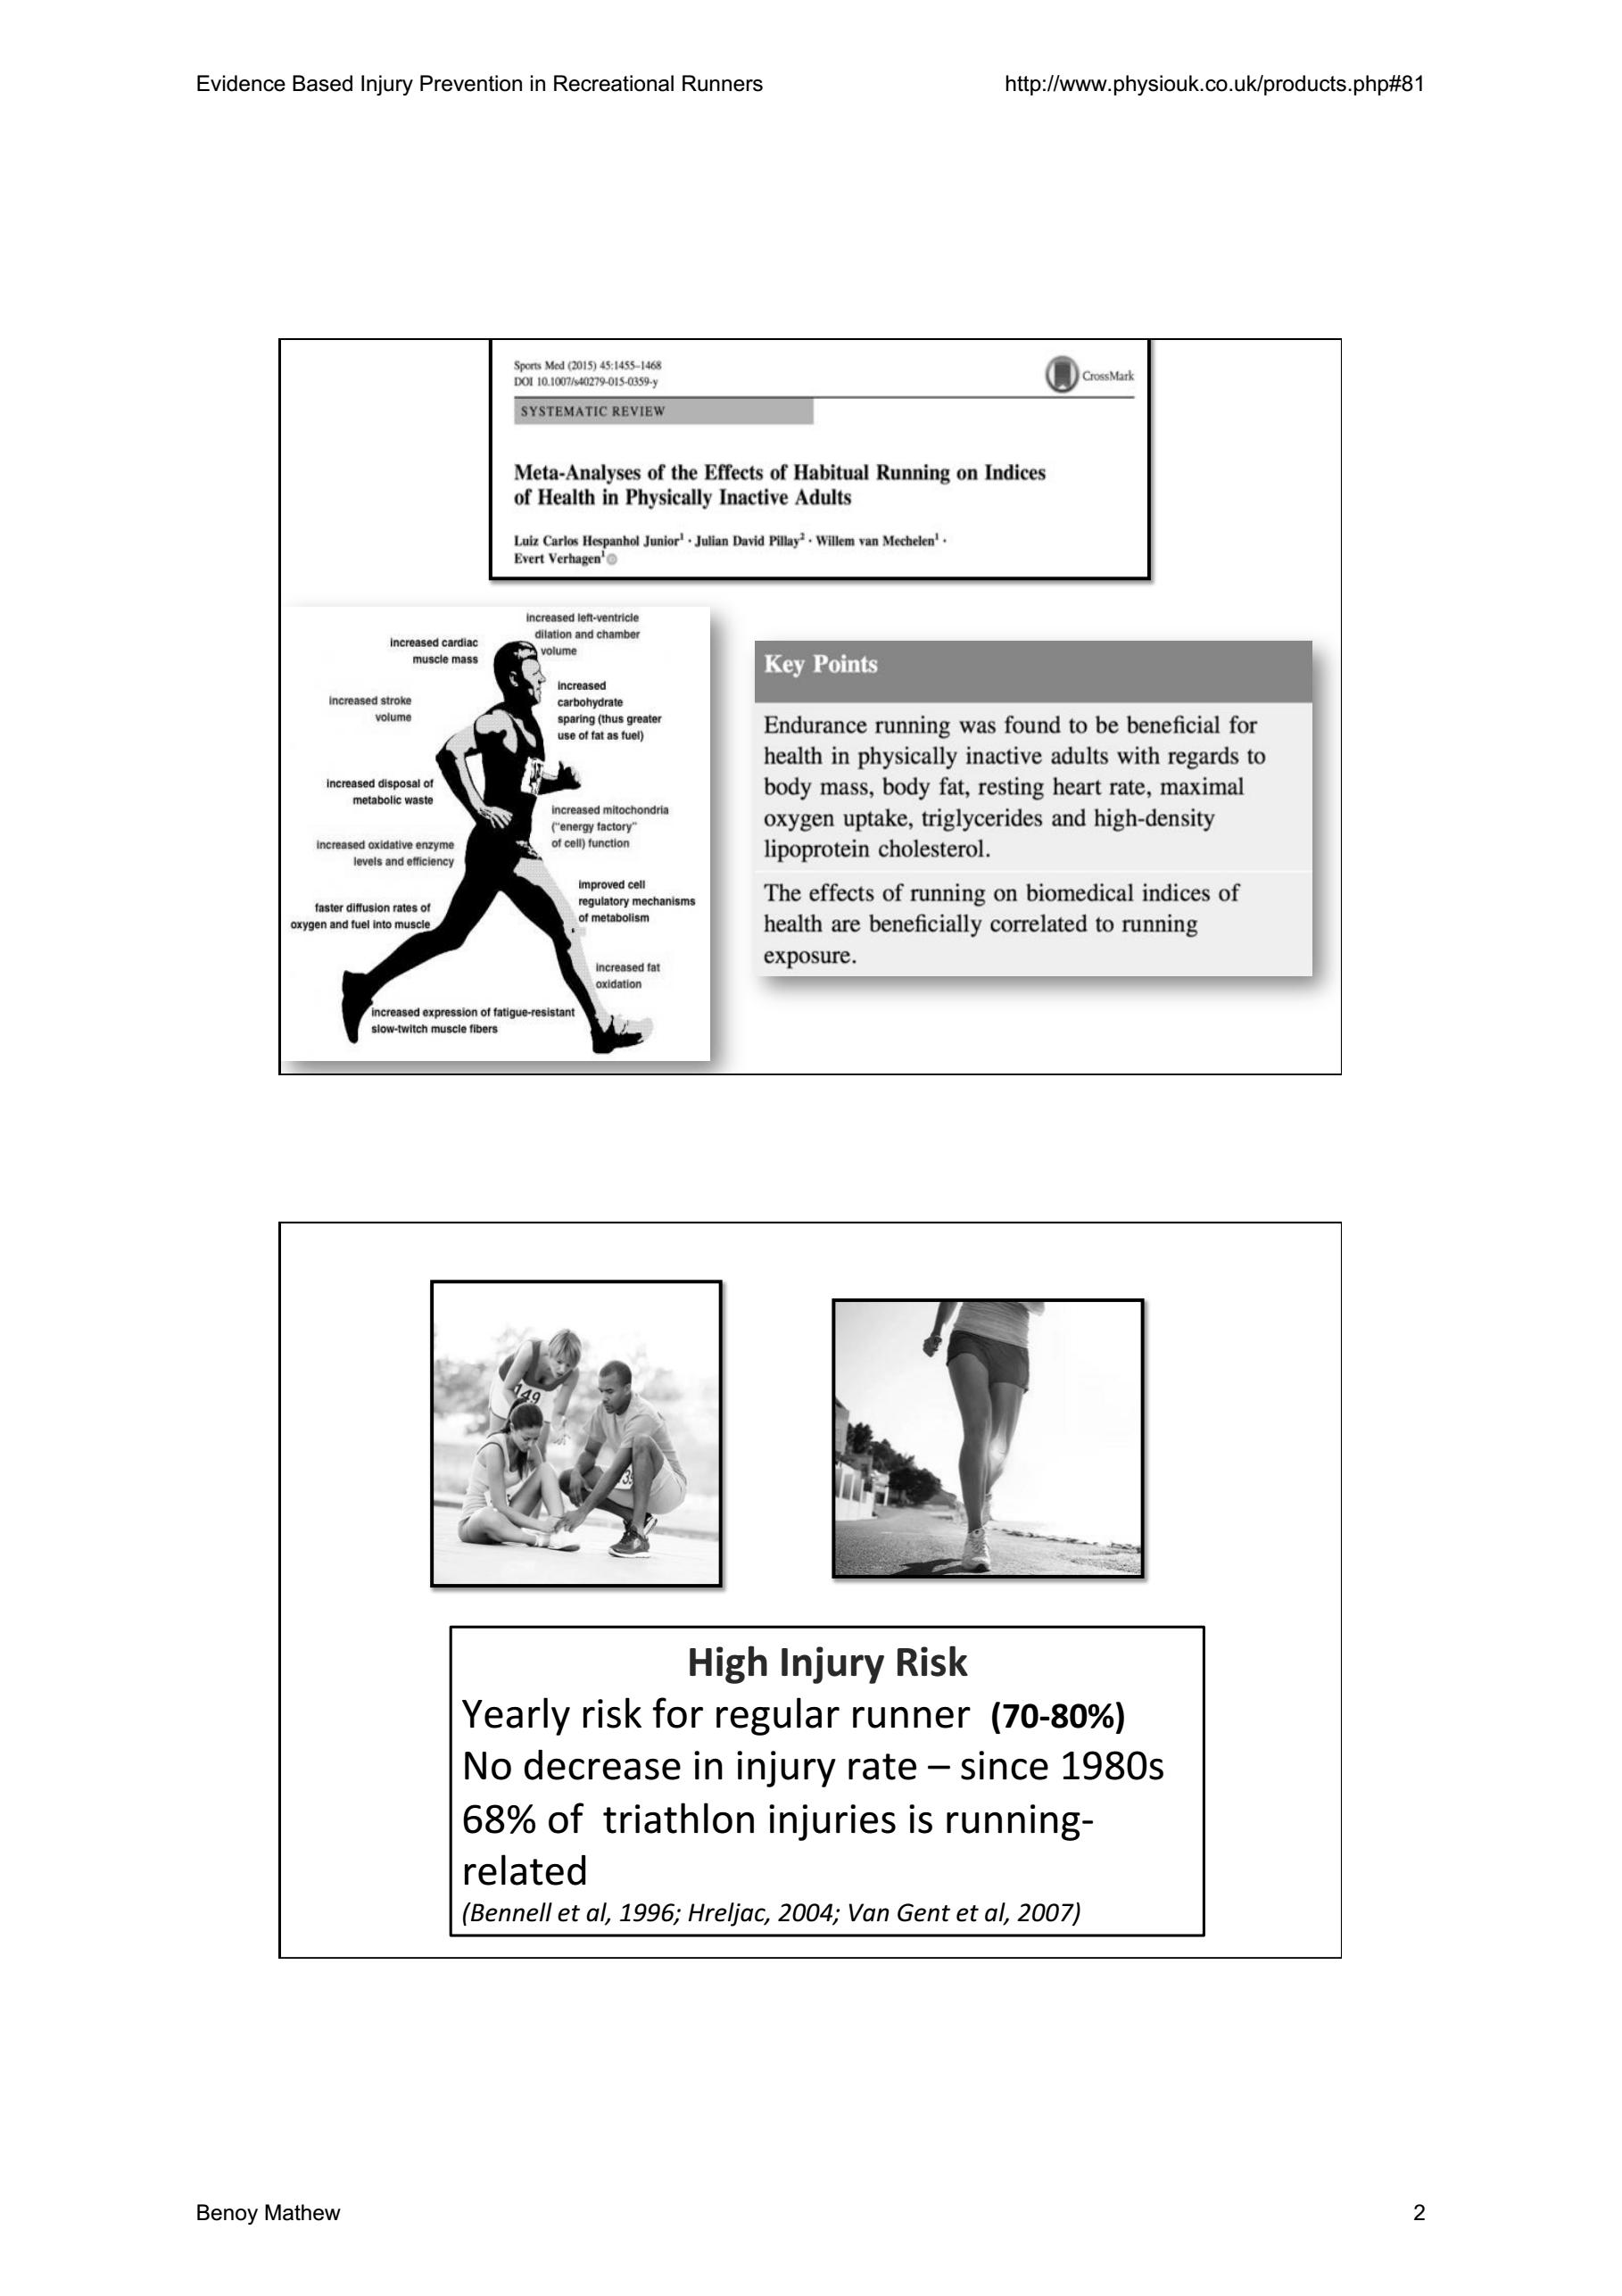 Running Injures   – A sample of our lecture notes   Beony Mathews and Glen Robbins Specialist Physiotherapists